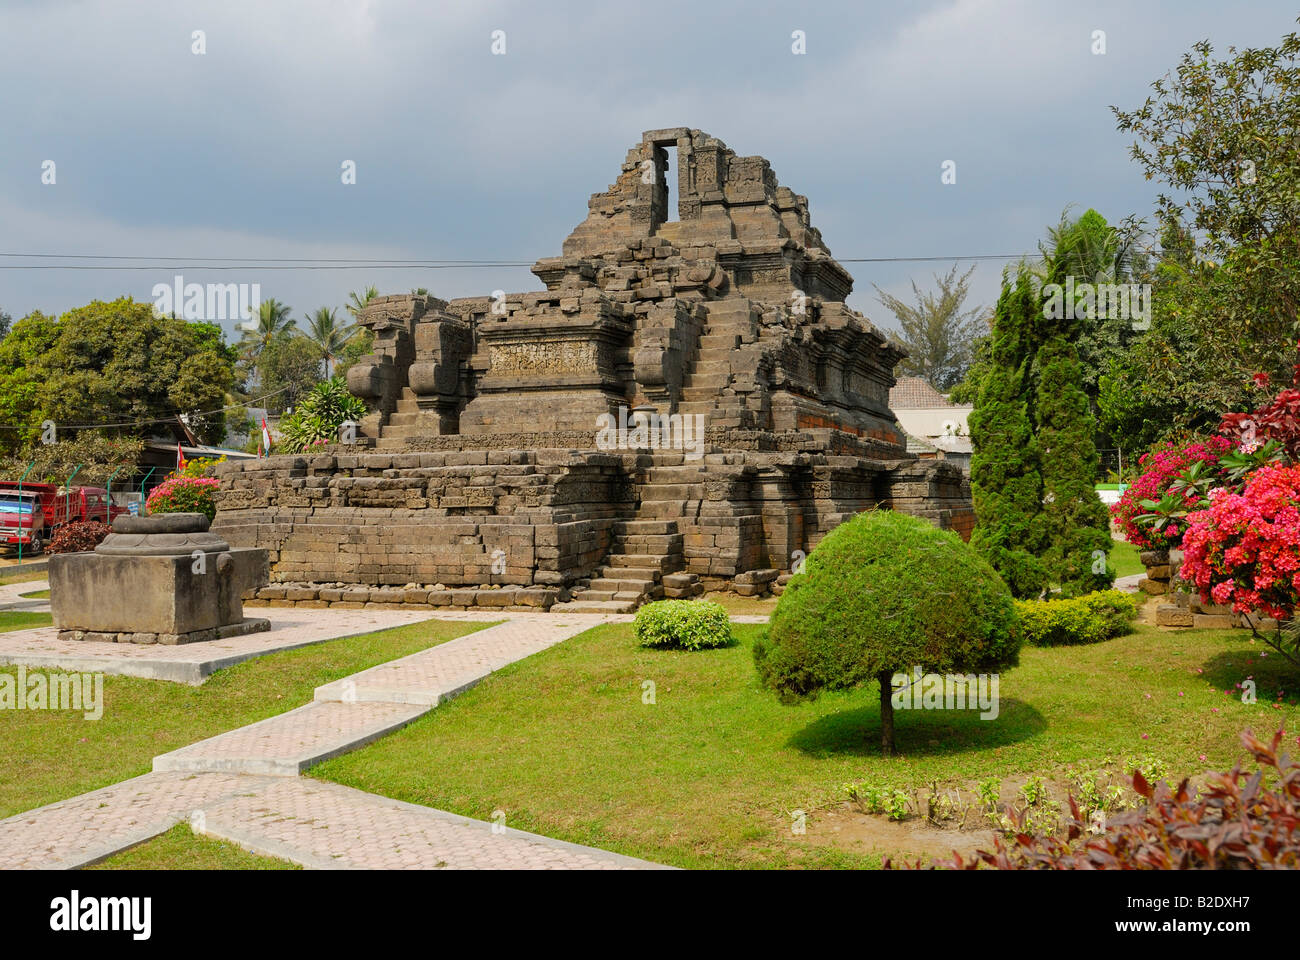 Candi Jago temple with influence of hinduism and javanism 13 century, JAVA, INDONESIA, SOUTHEAST ASIA Stock Photo